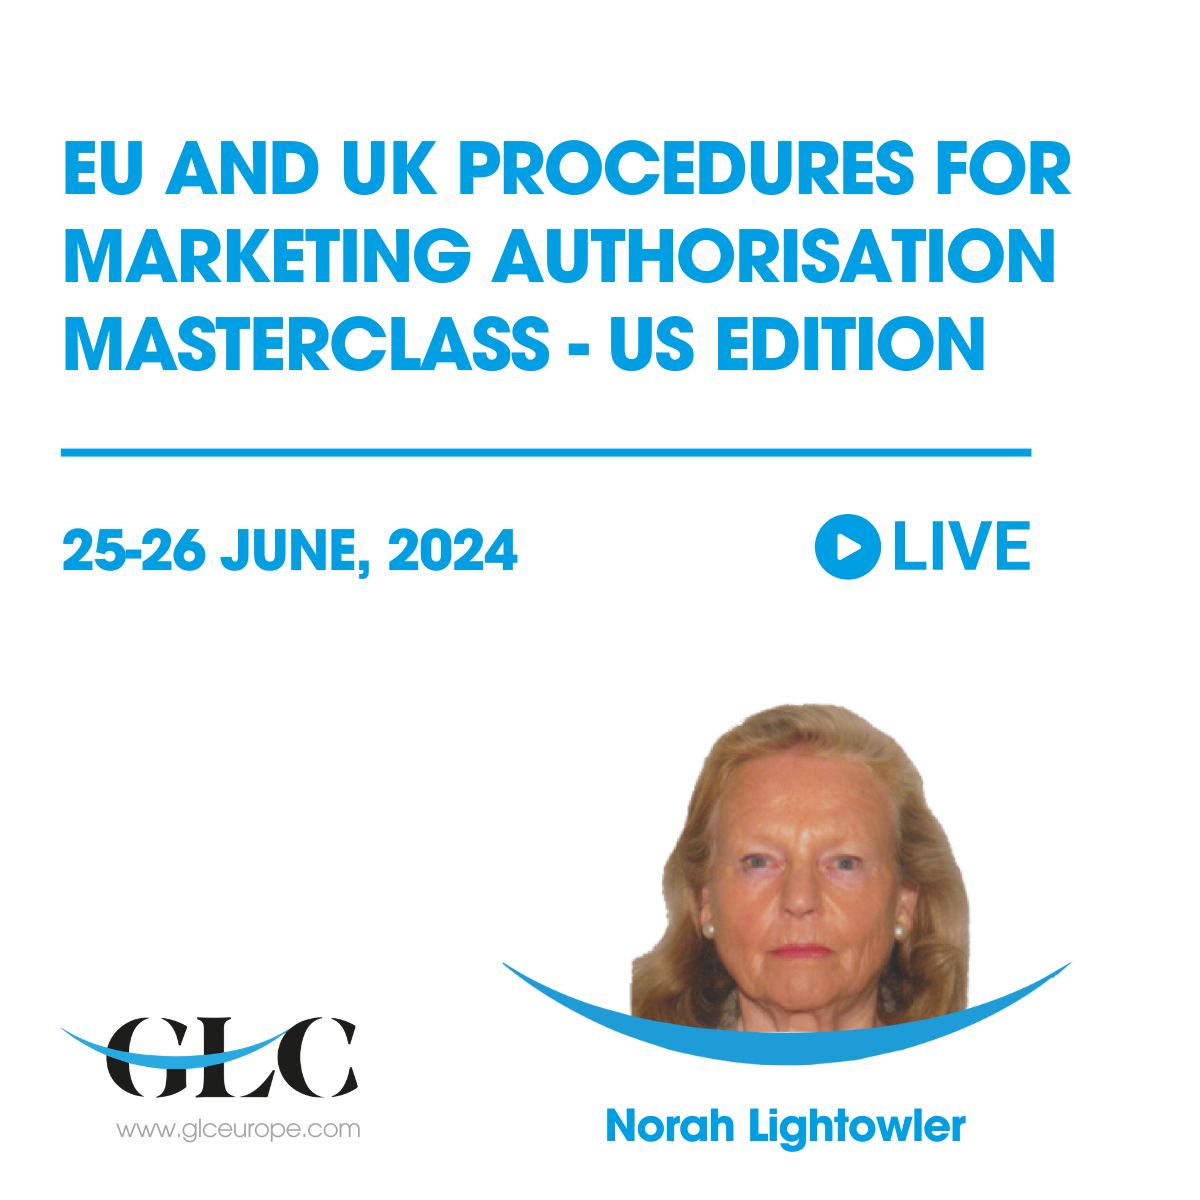 'EU and UK marketing authorisation: Uniting standards for global access' 

Join our upcoming EU and UK procedures for marketing authorisation Masterclass by Norah Lightowler: bit.ly/44dI8Y6

#glc #marketingauthorization #EUprocedures #UKprocedures #masterclass